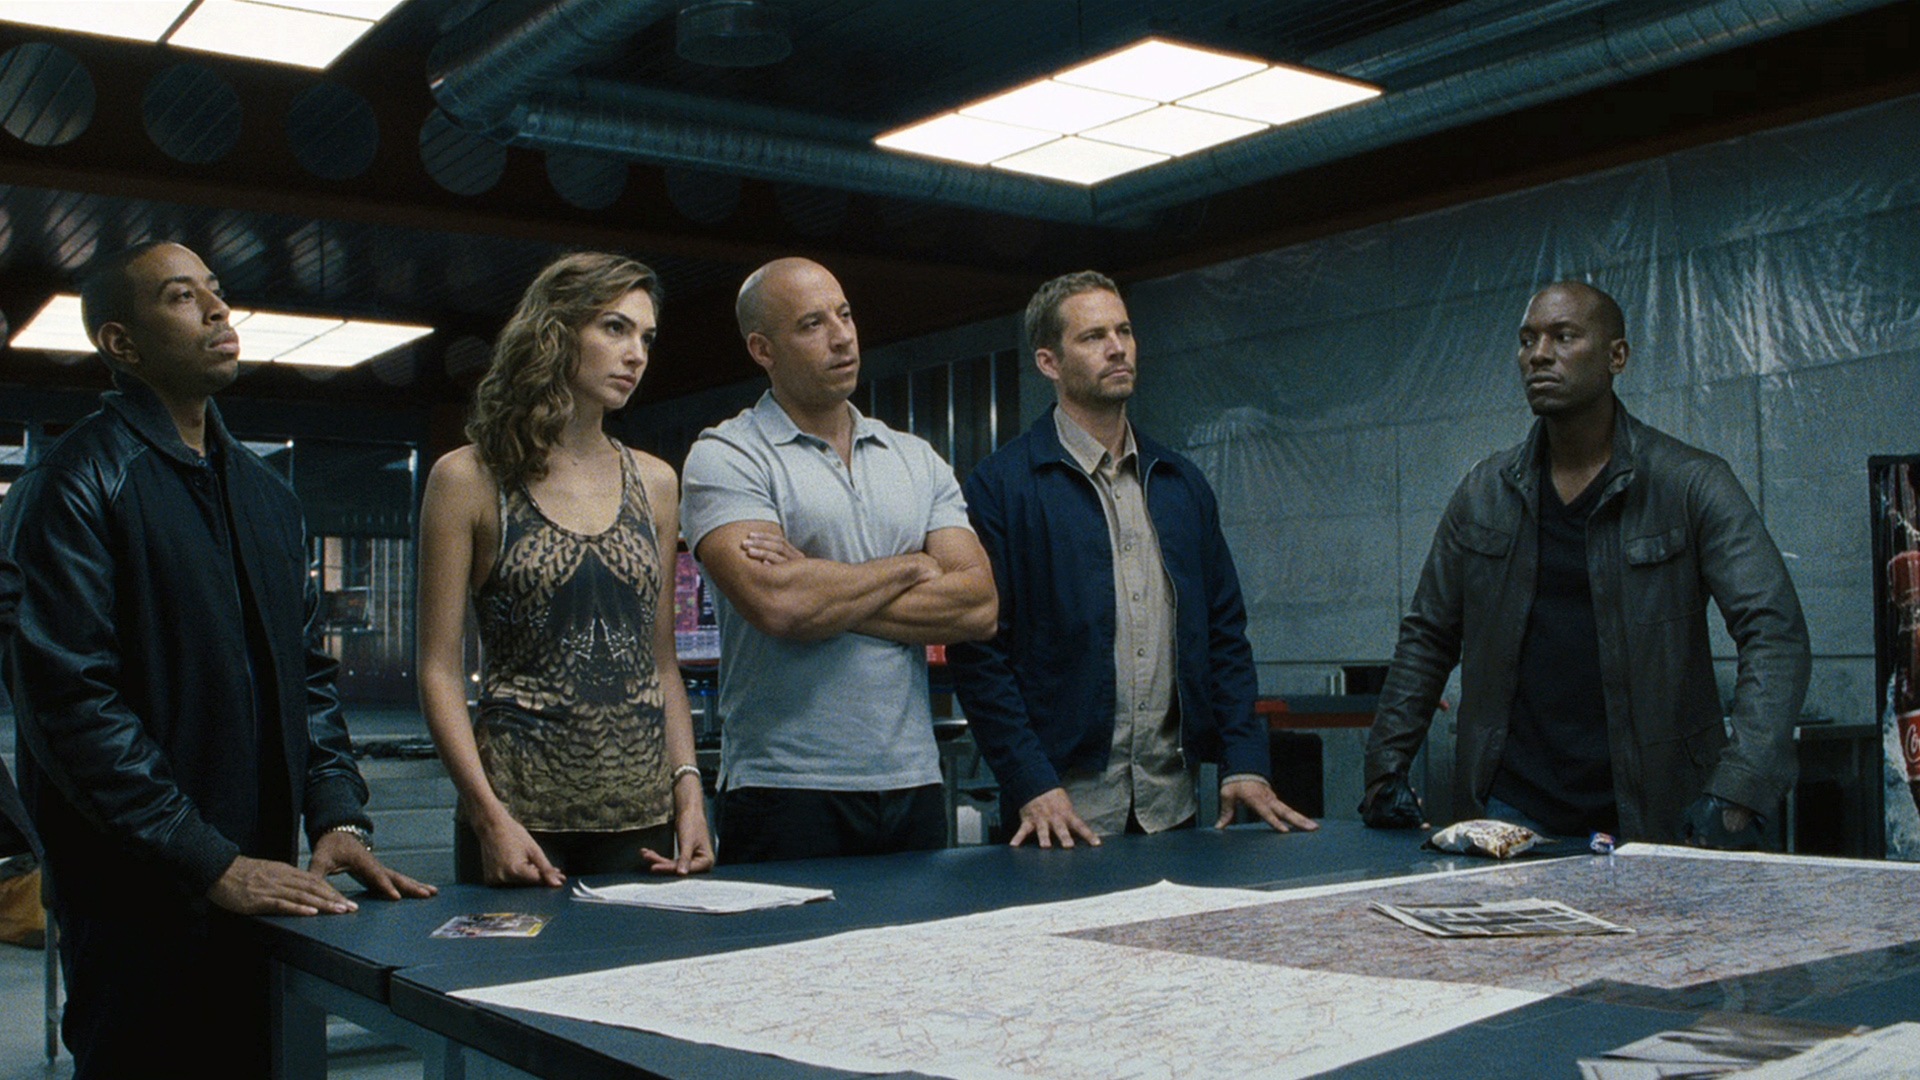 Fast And Furious 6 HD movie wallpapers #2 - 1920x1080